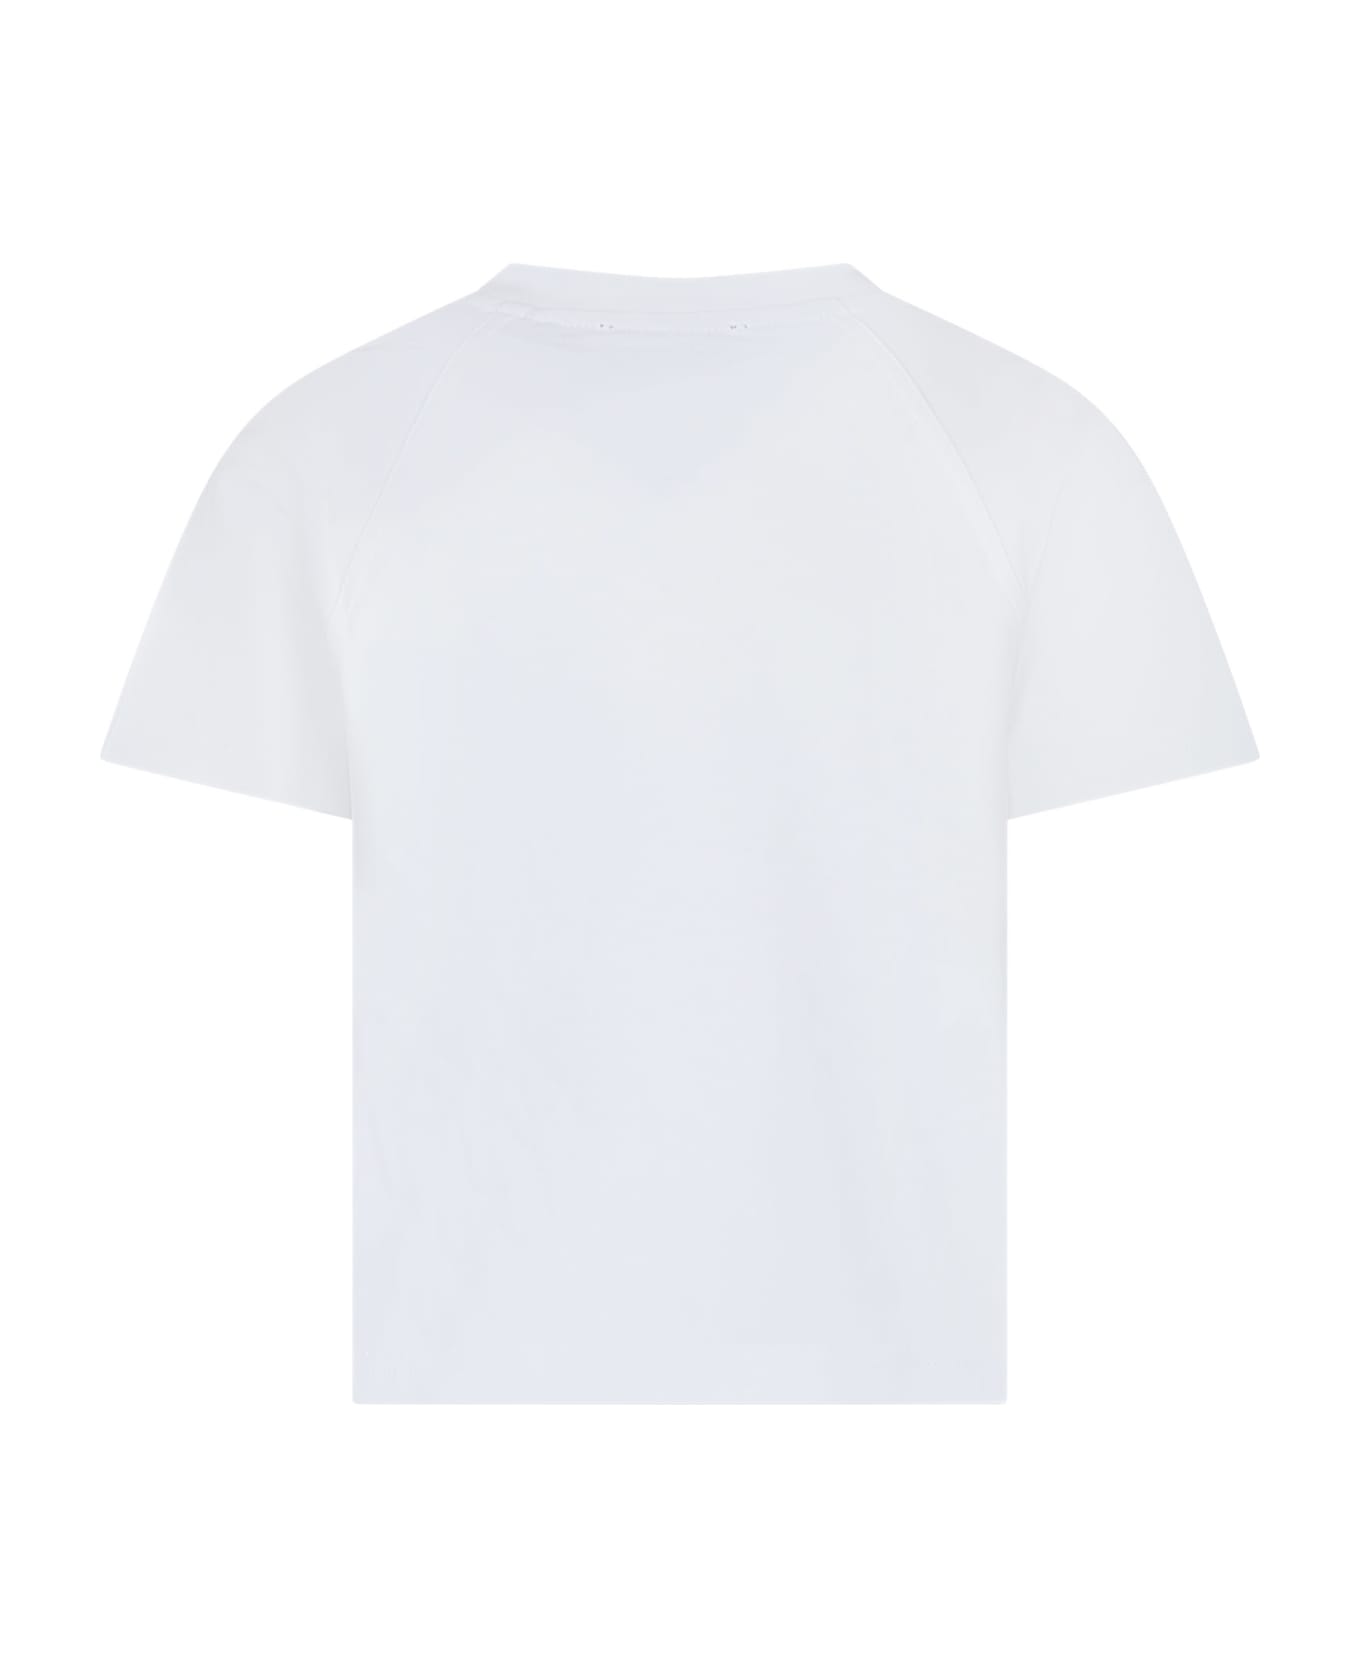 Burberry White T-shirt For Boy With Print And Equestrian Knight - White